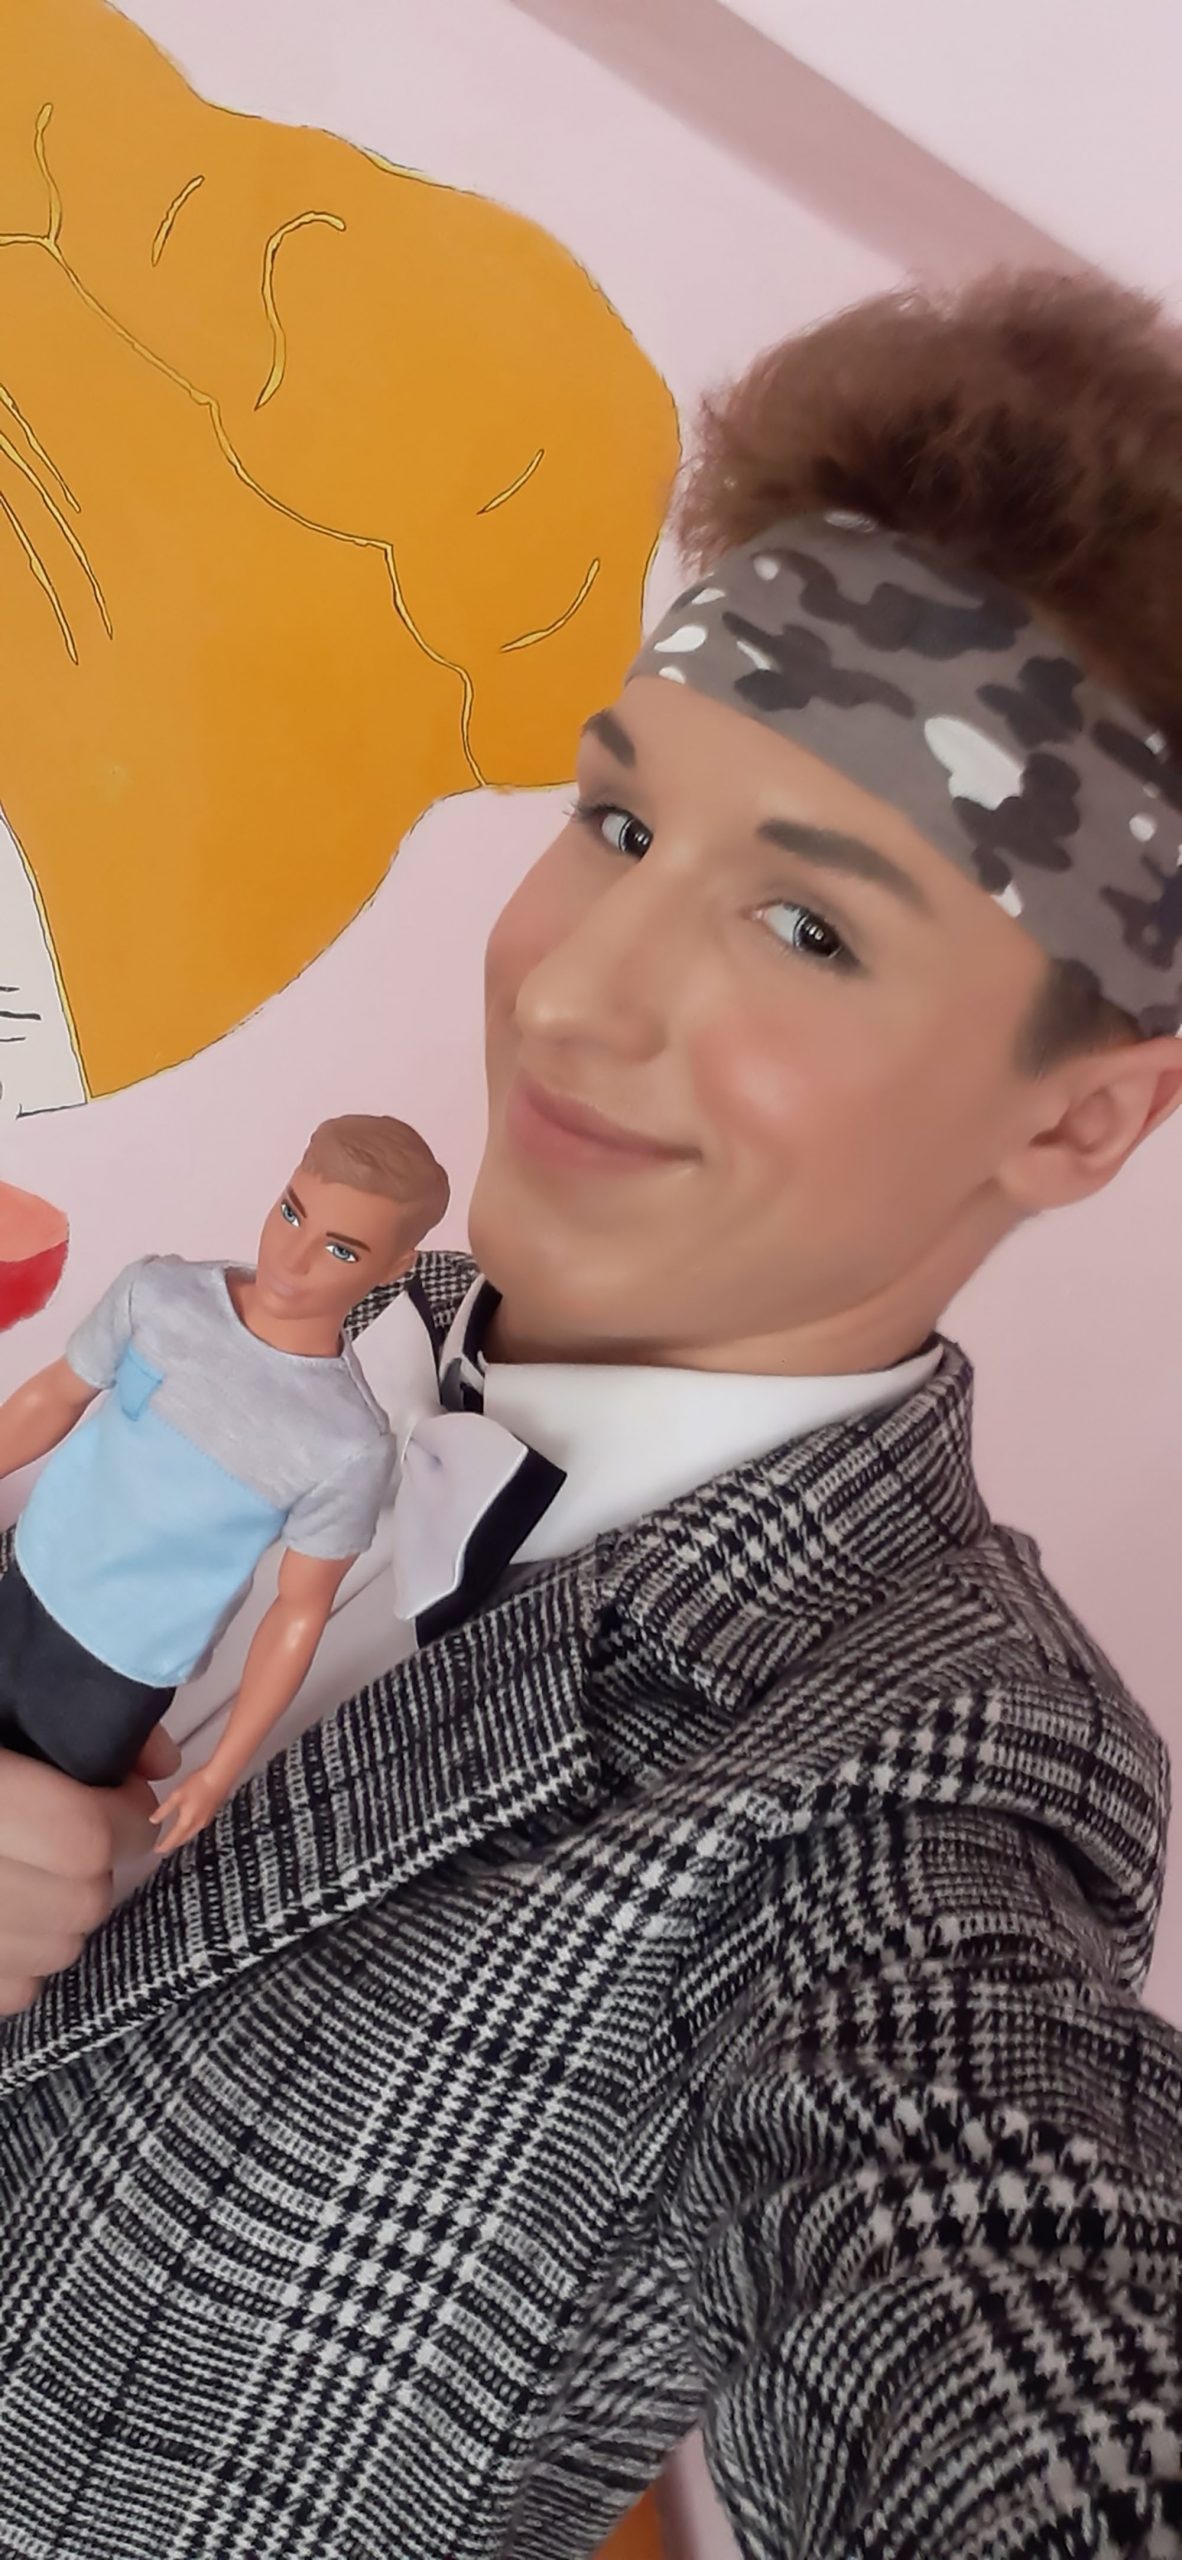 Read more about the article Ken Doll Wants Fame To Win Back Parents Who Ditched Him